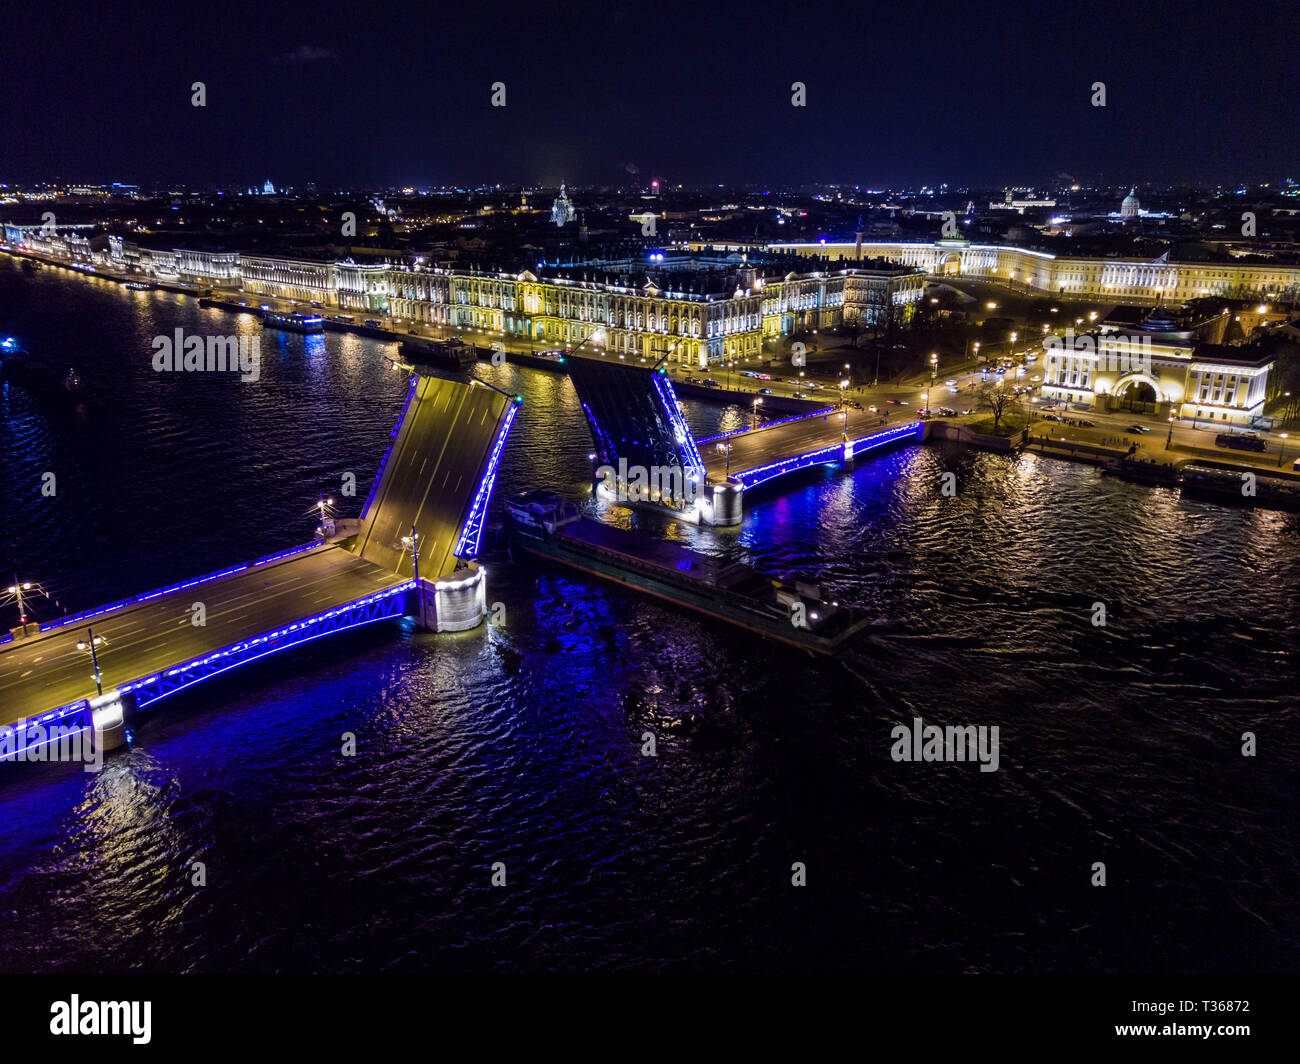 Summer night, Saint Petersburg, Russia. Neva River. A ship passes under drawn bascule moveable Palace bridge. Winter Palace. Admiralty. Palace Square. Stock Photo